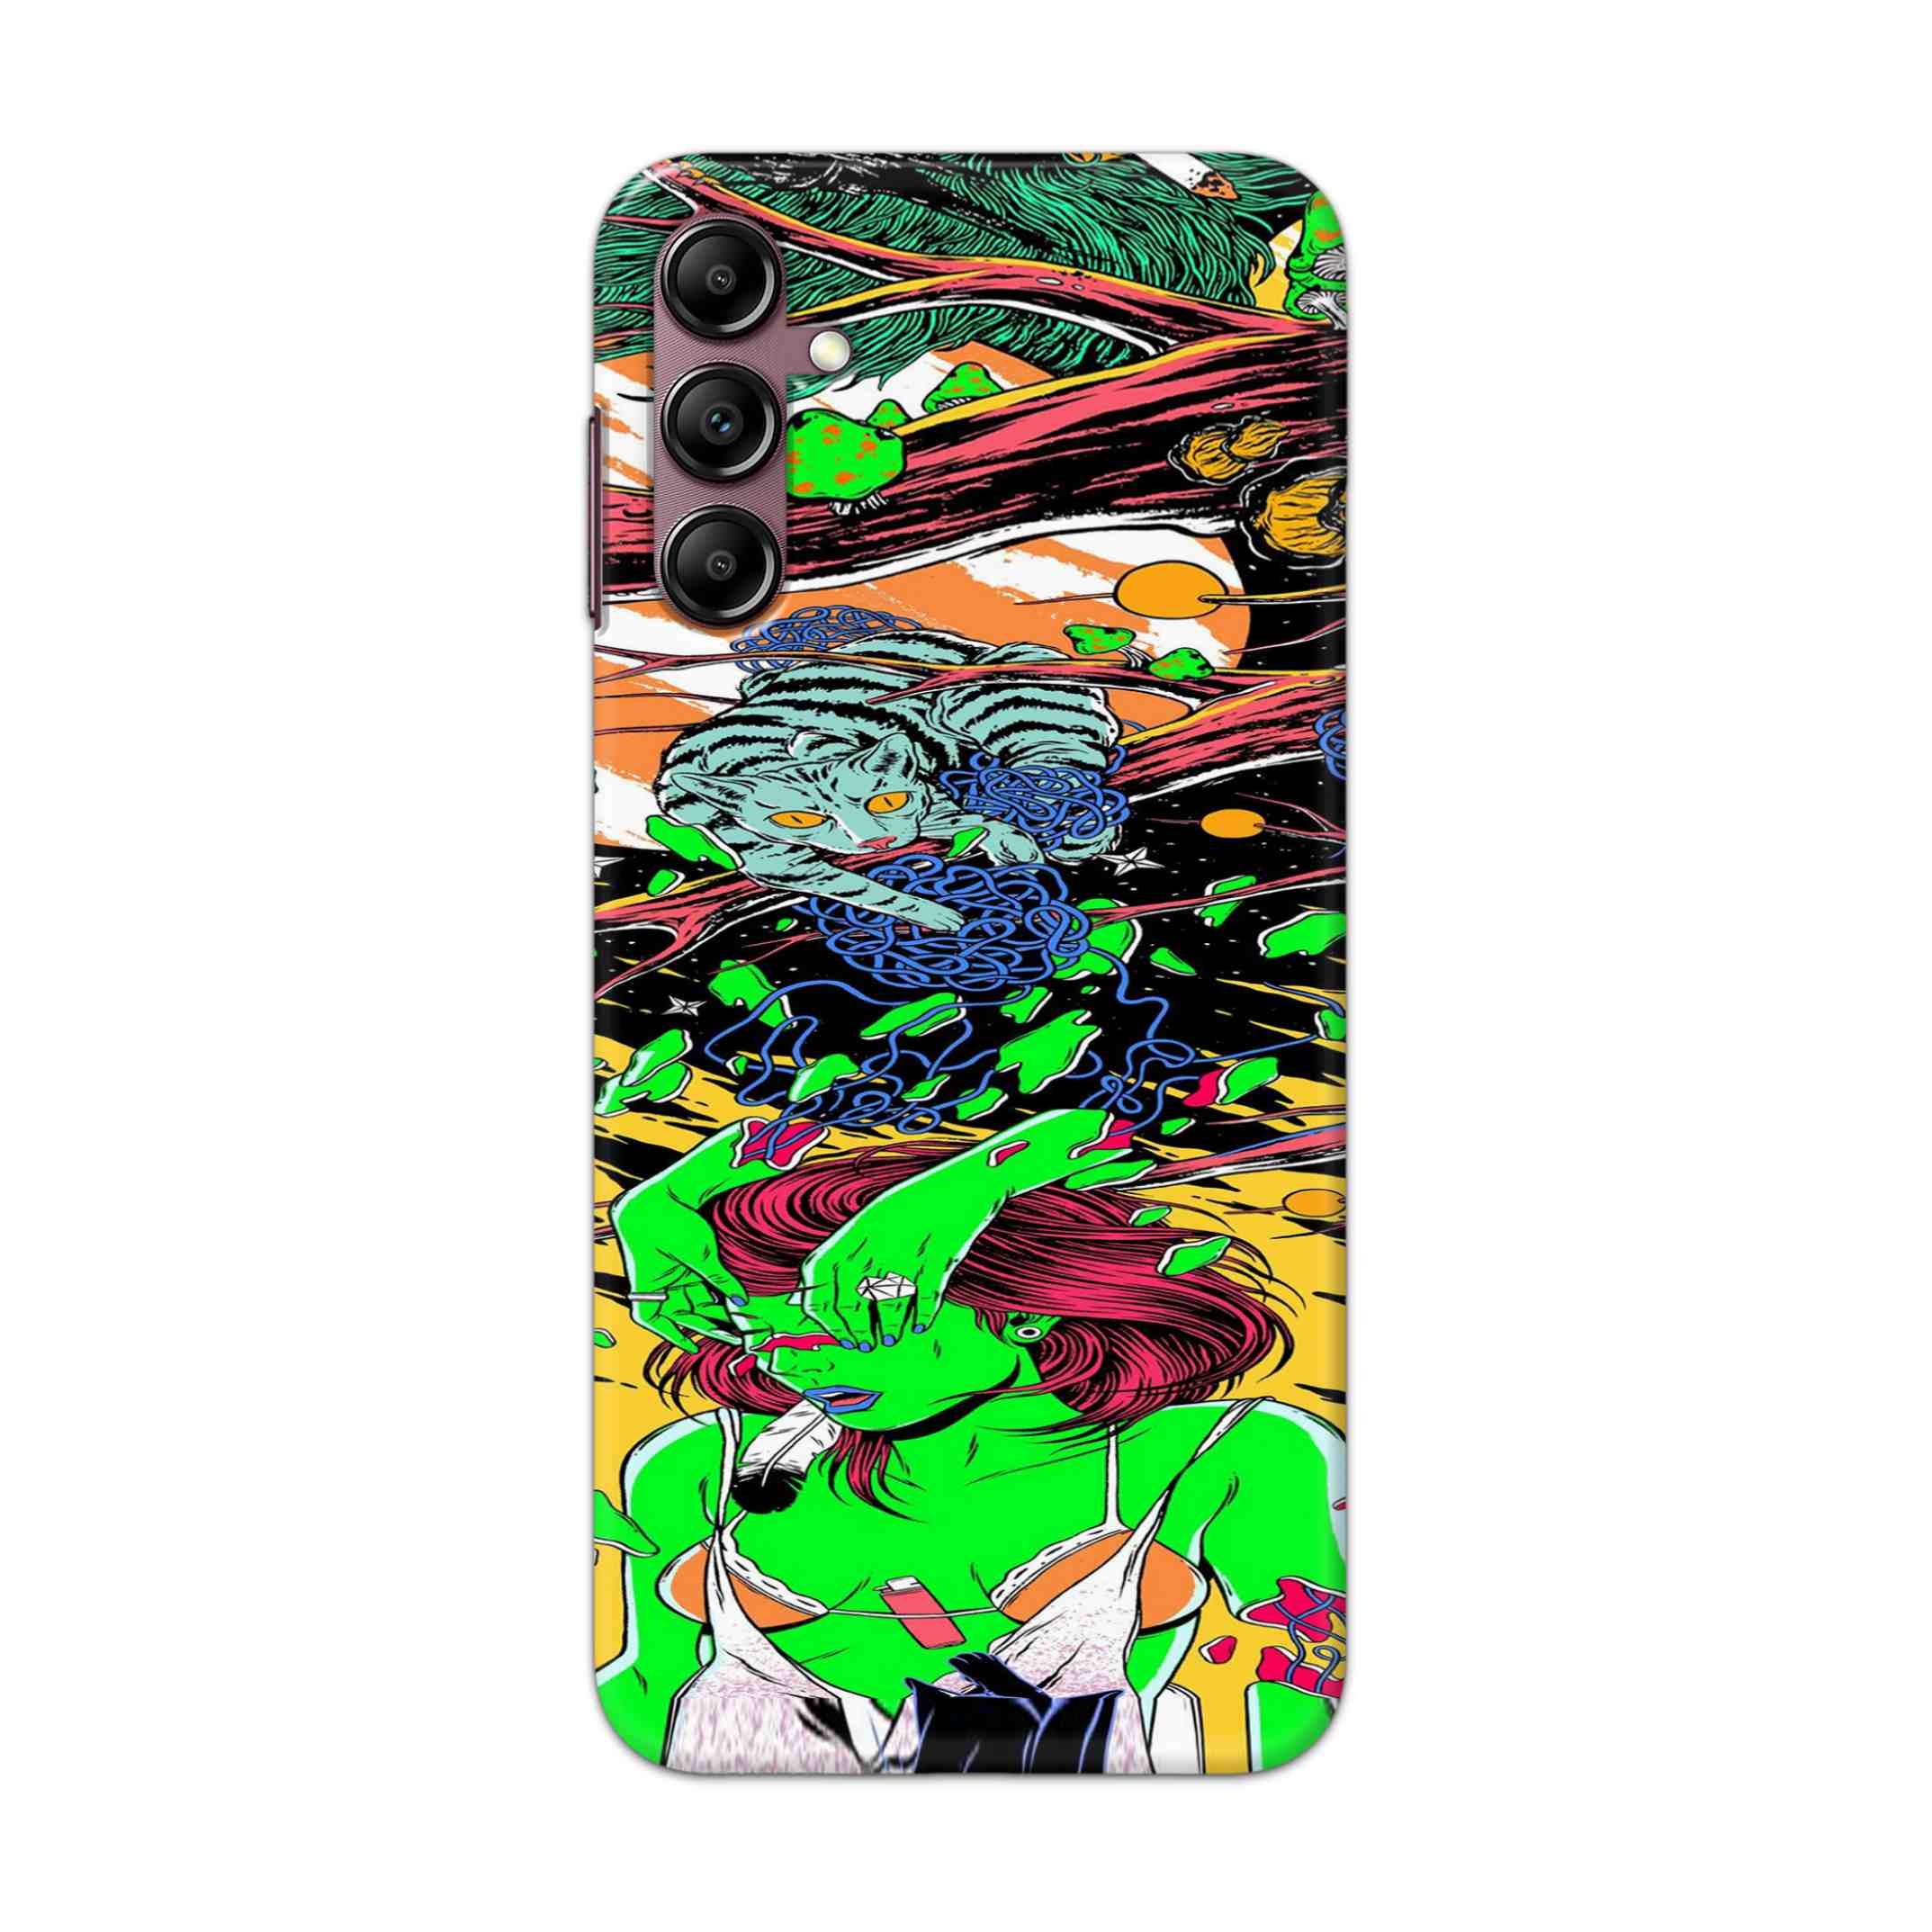 Buy Green Girl Art Hard Back Mobile Phone Case Cover For Samsung Galaxy A14 Online